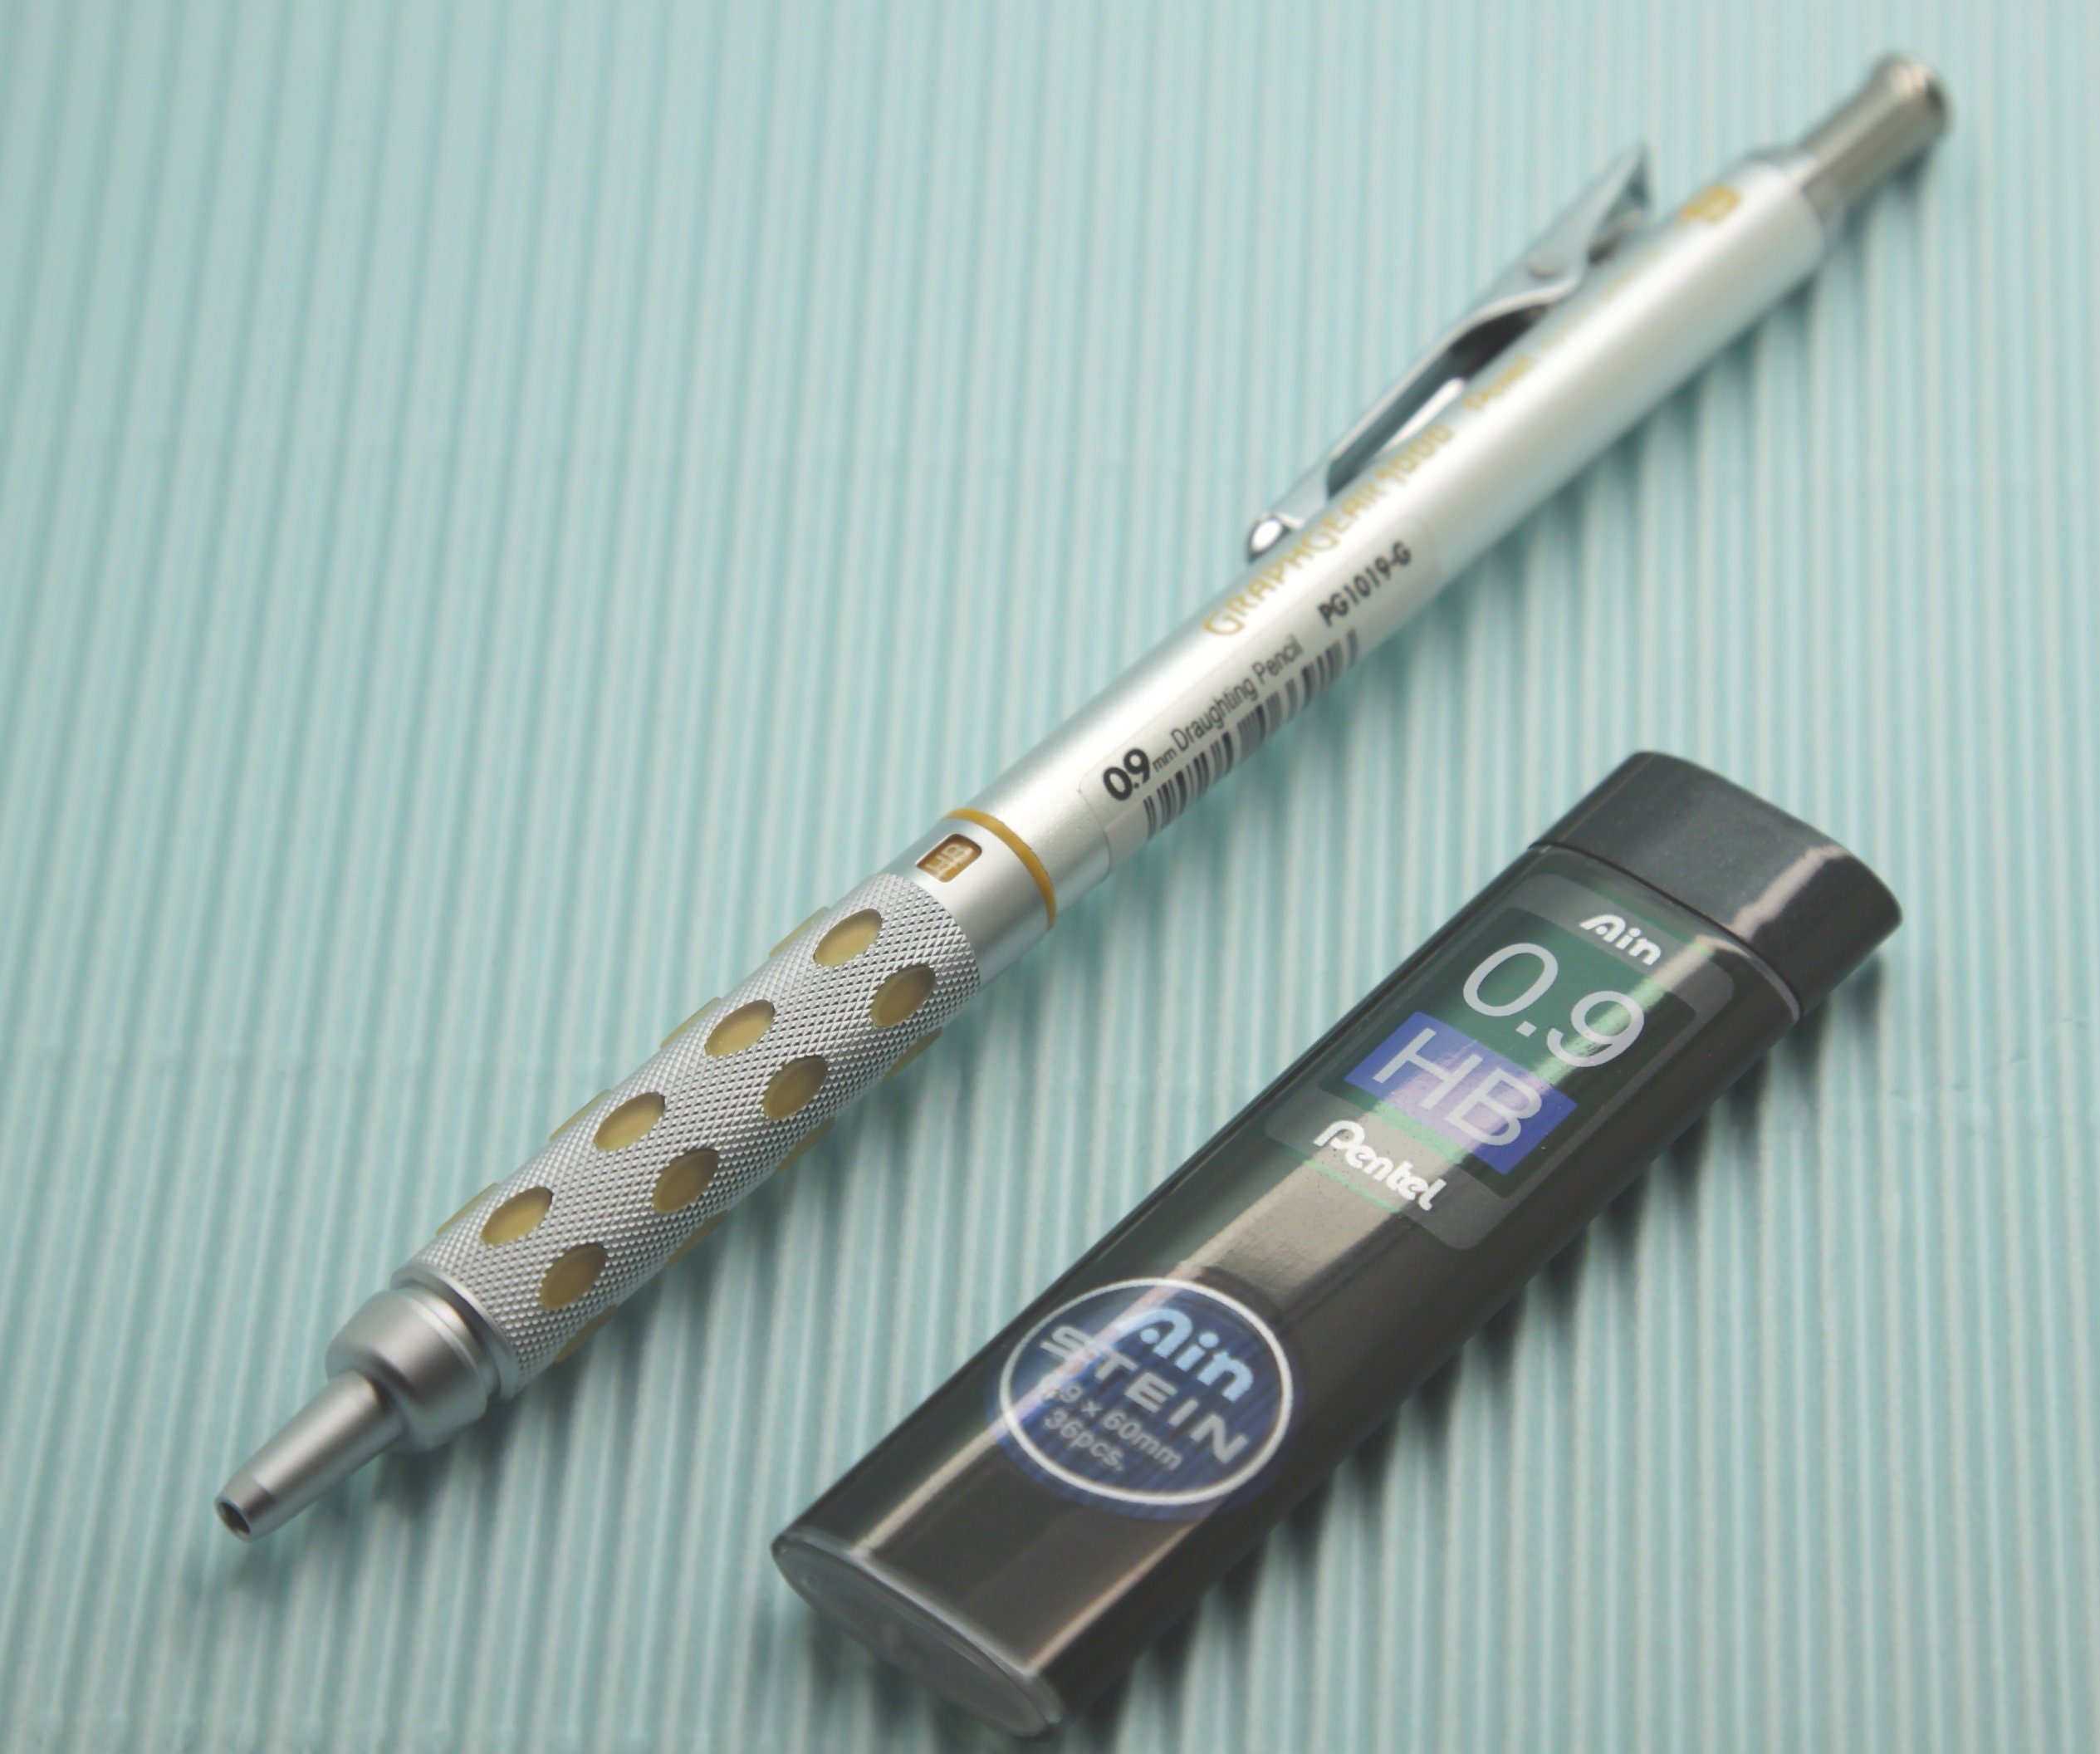 PICA Fine Dry Longlife Automatic Pencil, 0.9mm, 7070 